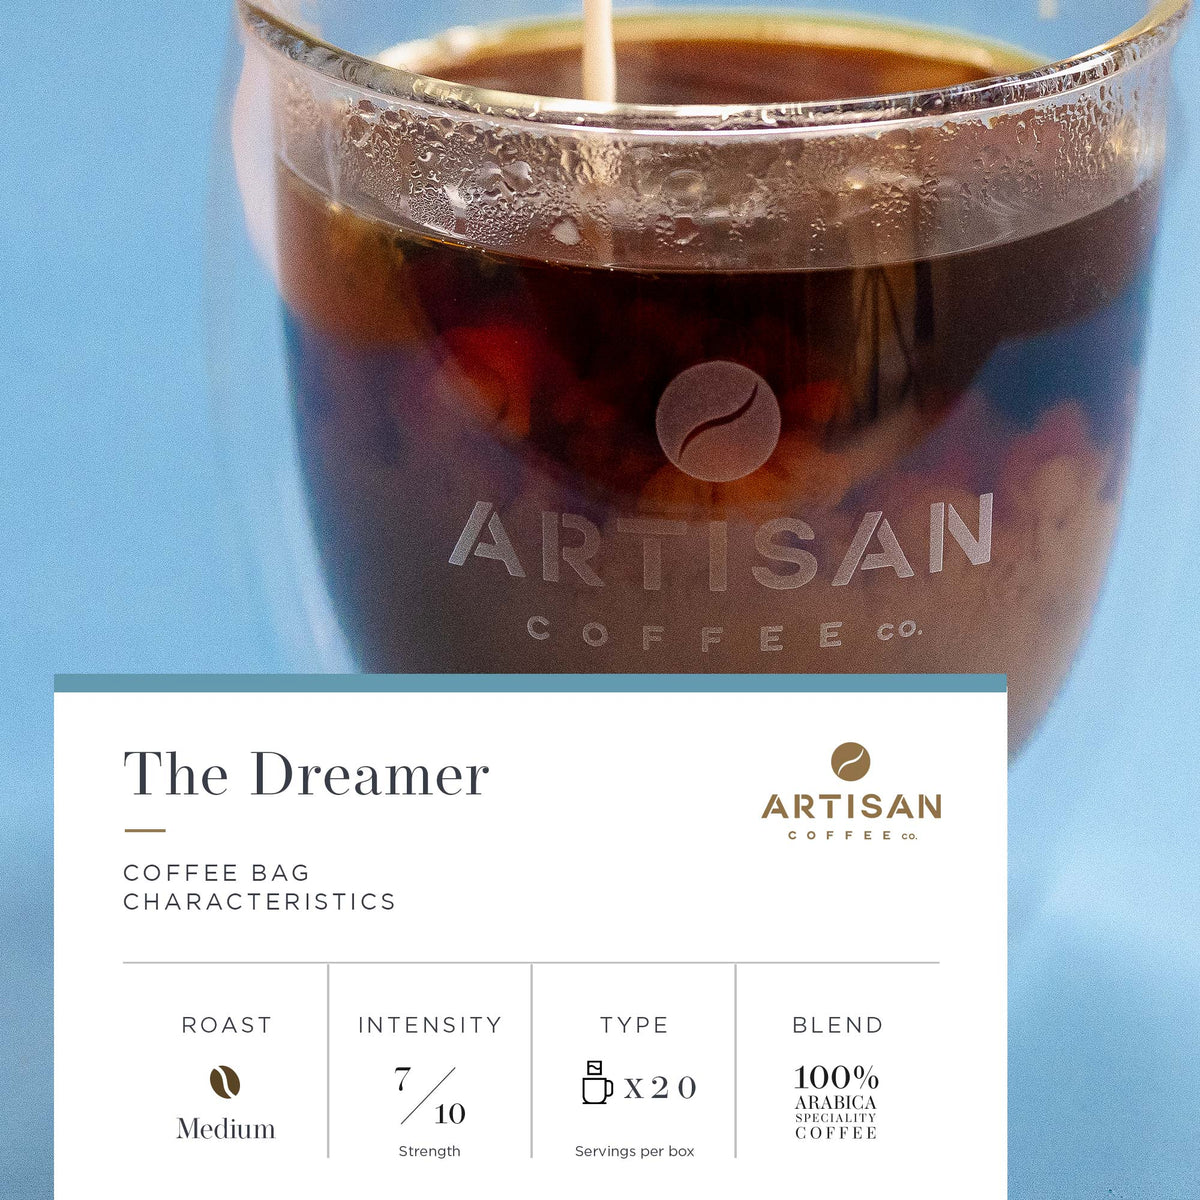 Artisan Coffee Co The Dreamer Coffee bags Infographic Characteristics